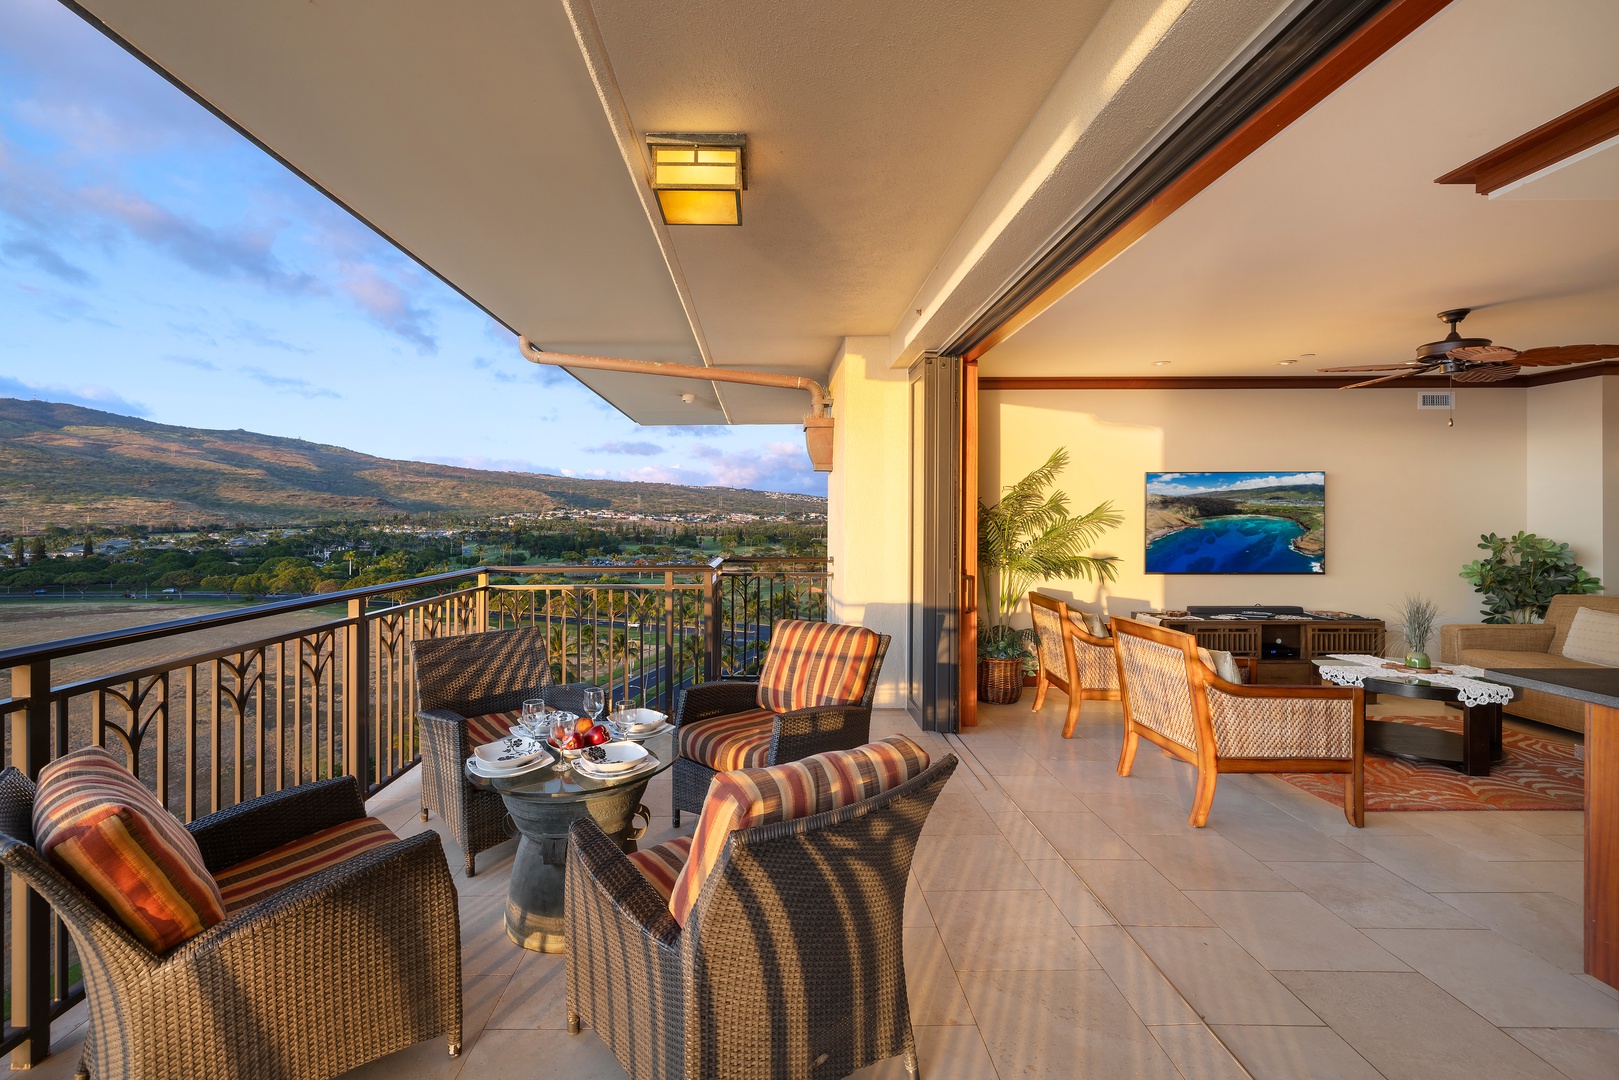 Kapolei Vacation Rentals, Ko Olina Beach Villas B1101 - Inviting lanai space with comfortable seating and a dining set, offering a panoramic view of rolling hills under a soft sunset sky.